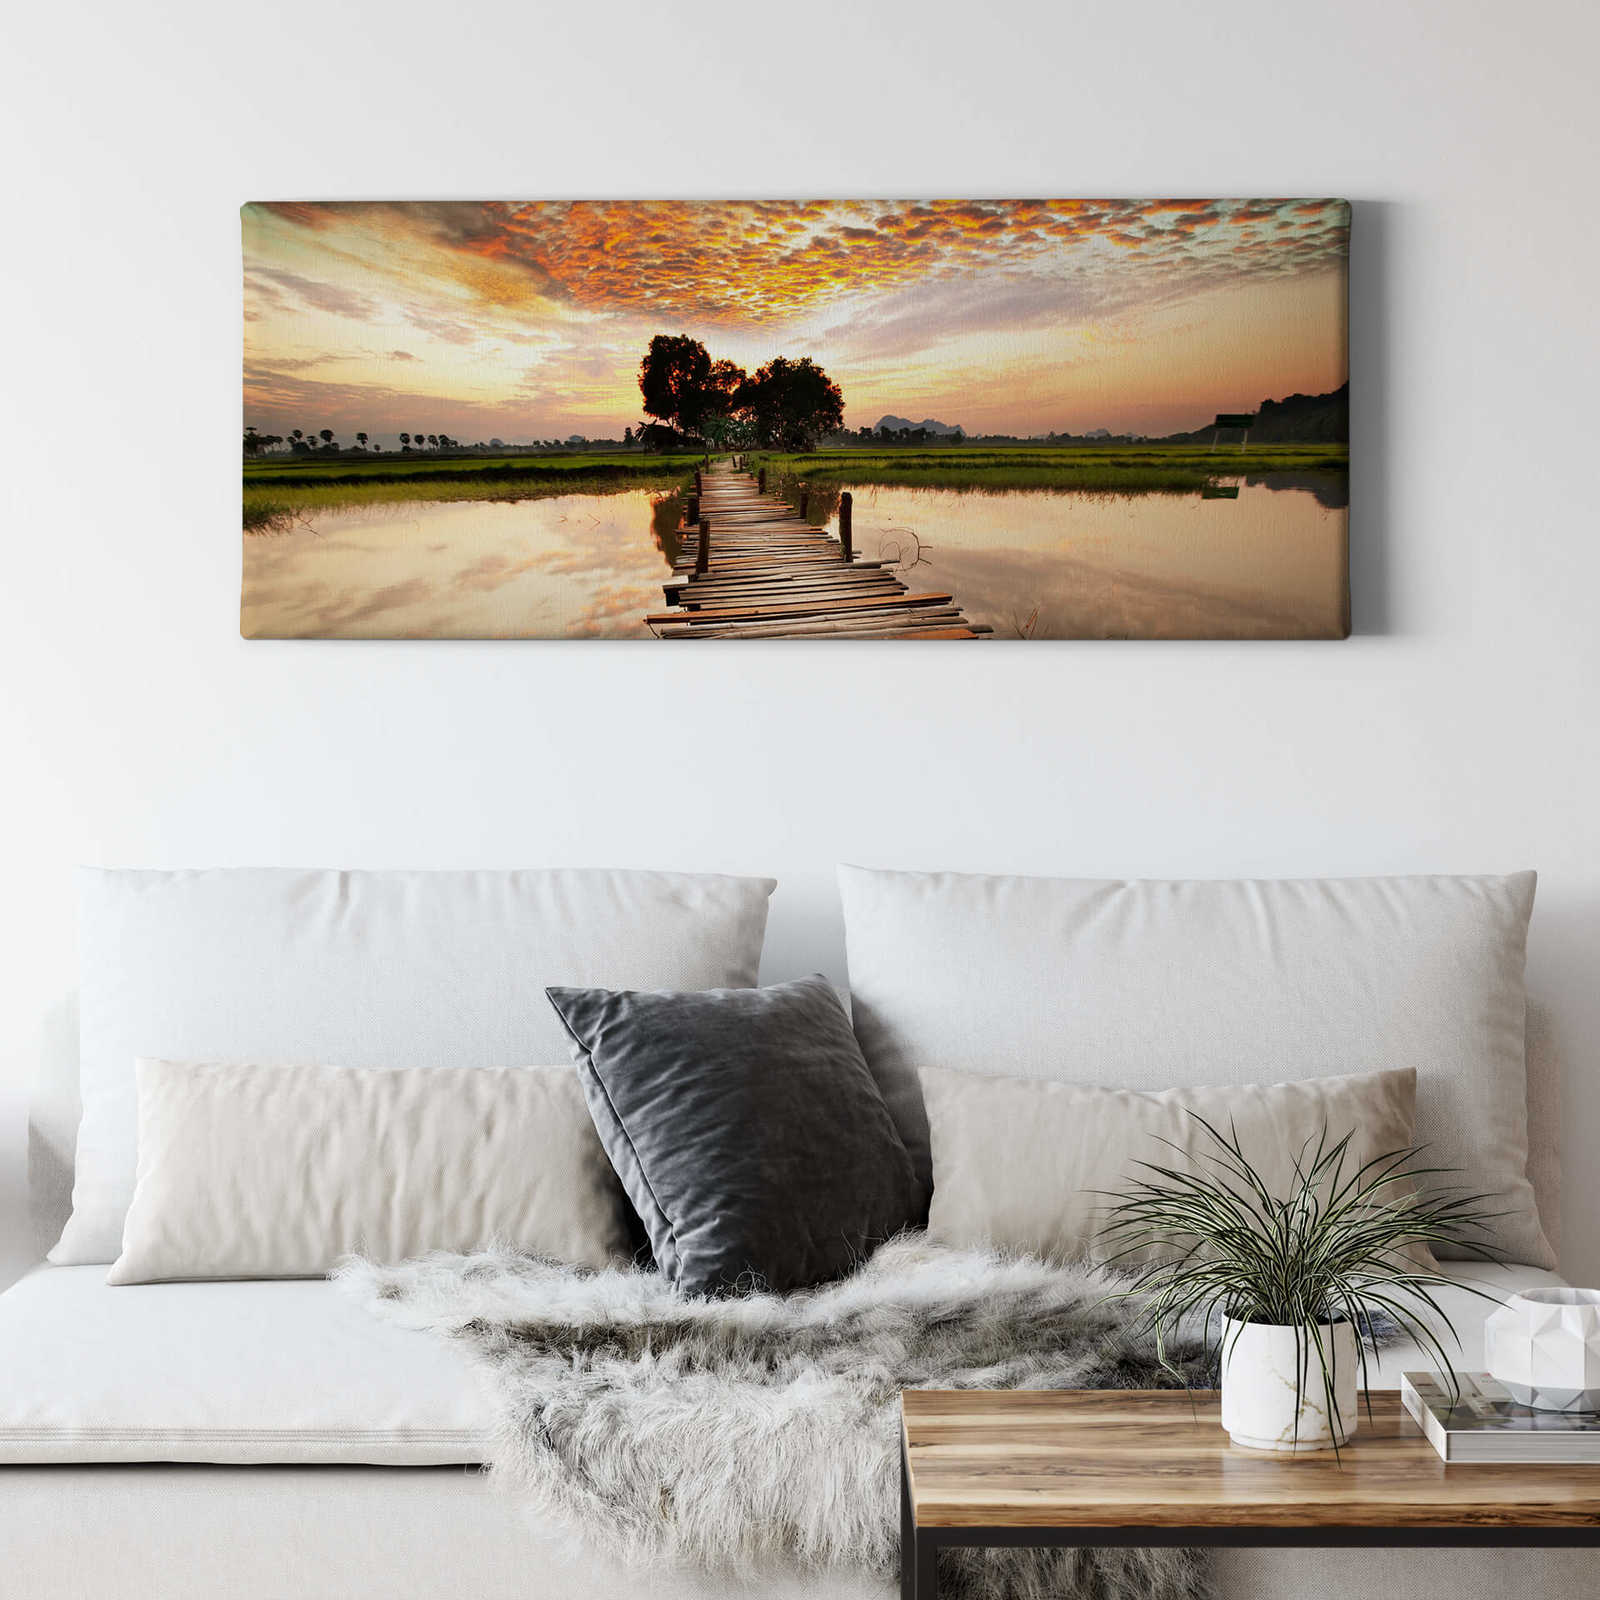             Nature panorama canvas print of water in brown
        